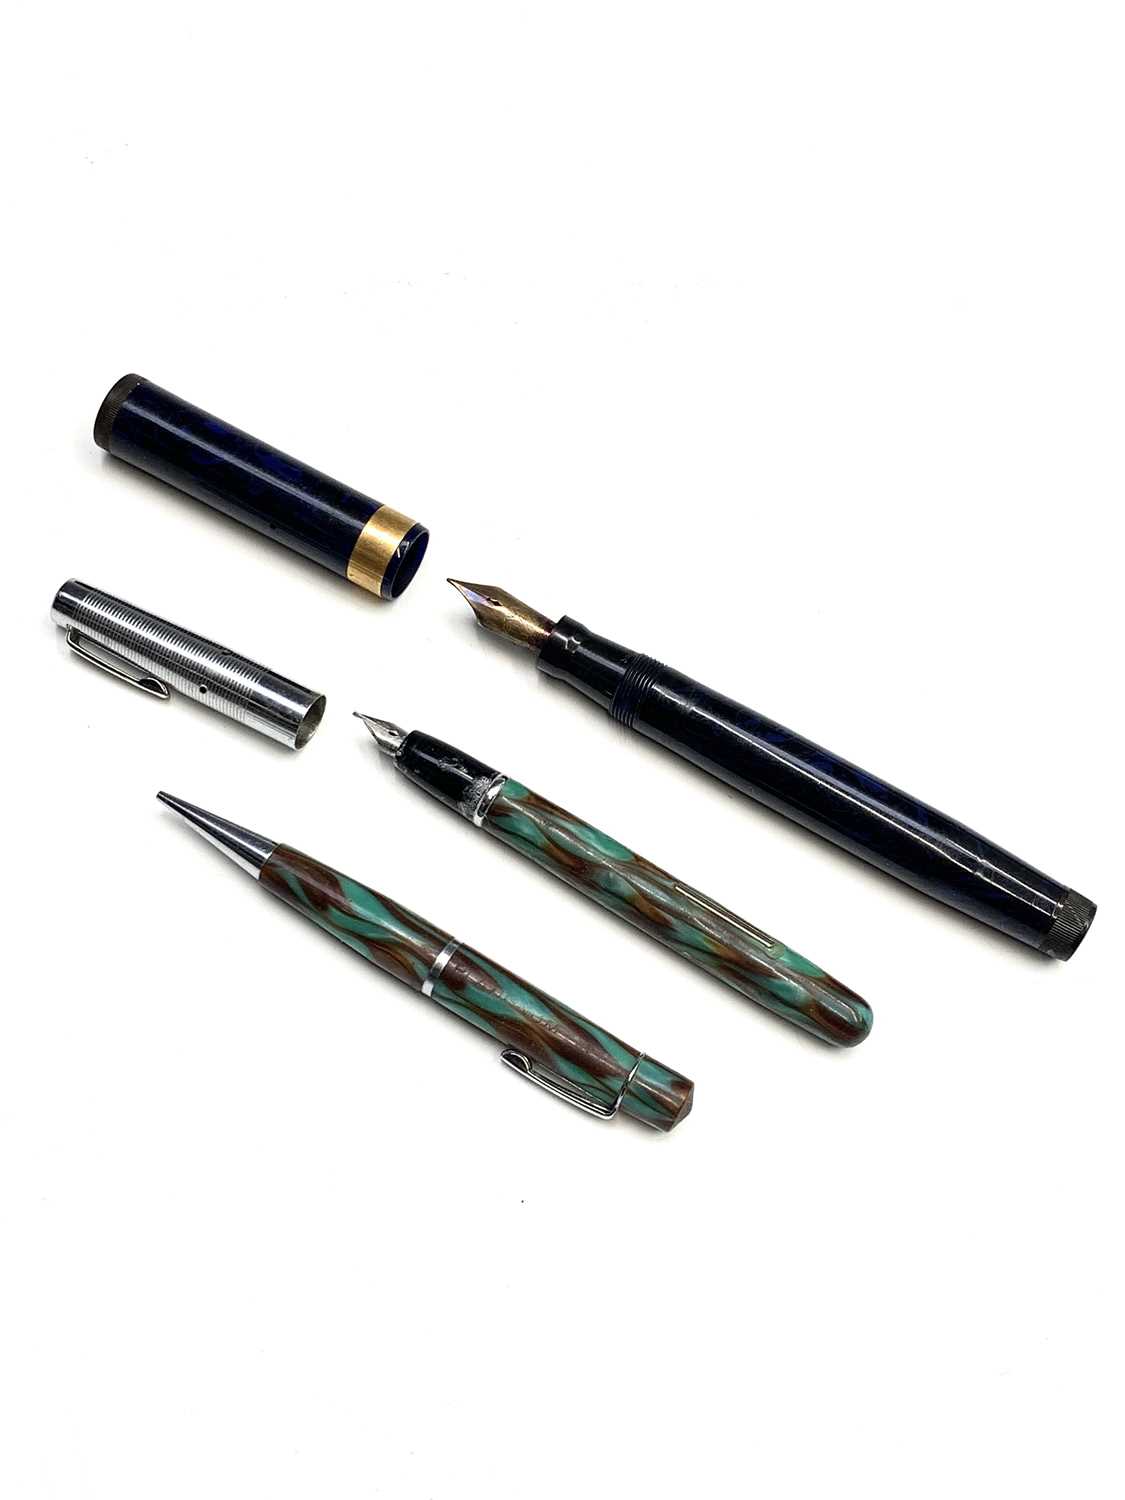 A Swan Mabie Todd L 470/52 Blue/Black,Marble Leverless fountain pen with size 4 14ct gold nib. The